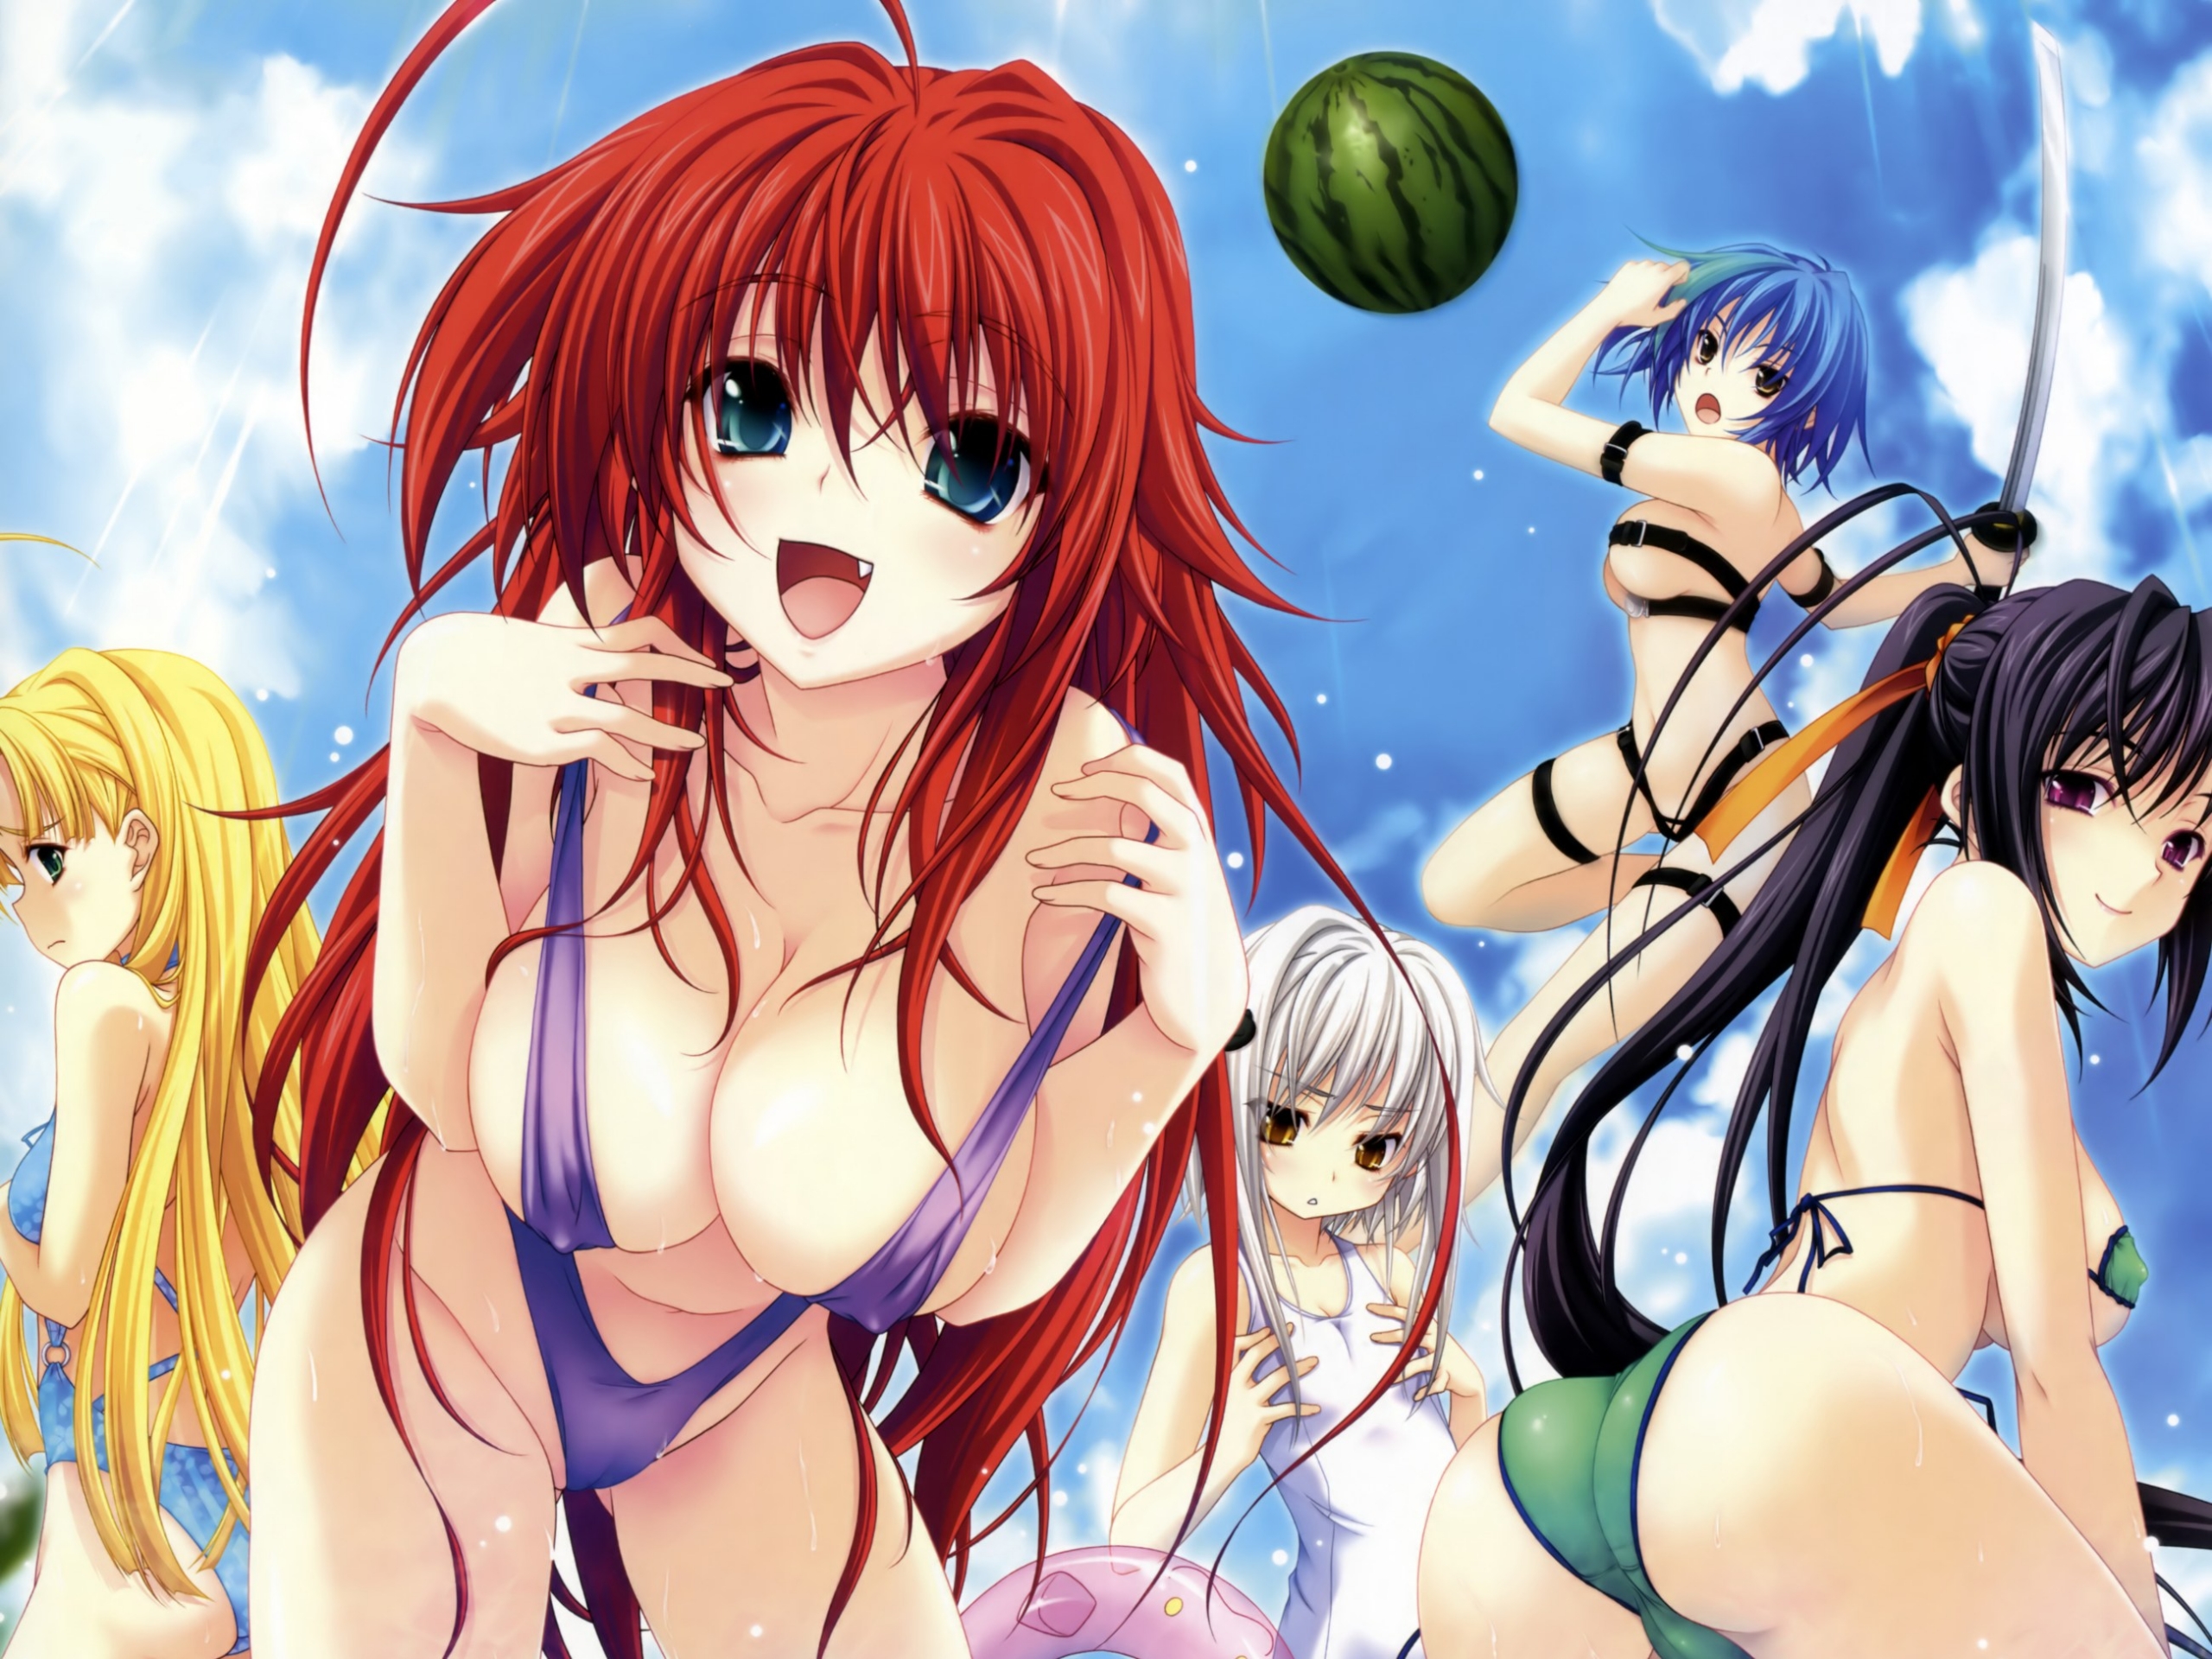 Highschool DxD - Sexy - Sexy, hot anime and characters Wallpaper (36397543)  - Fanpop